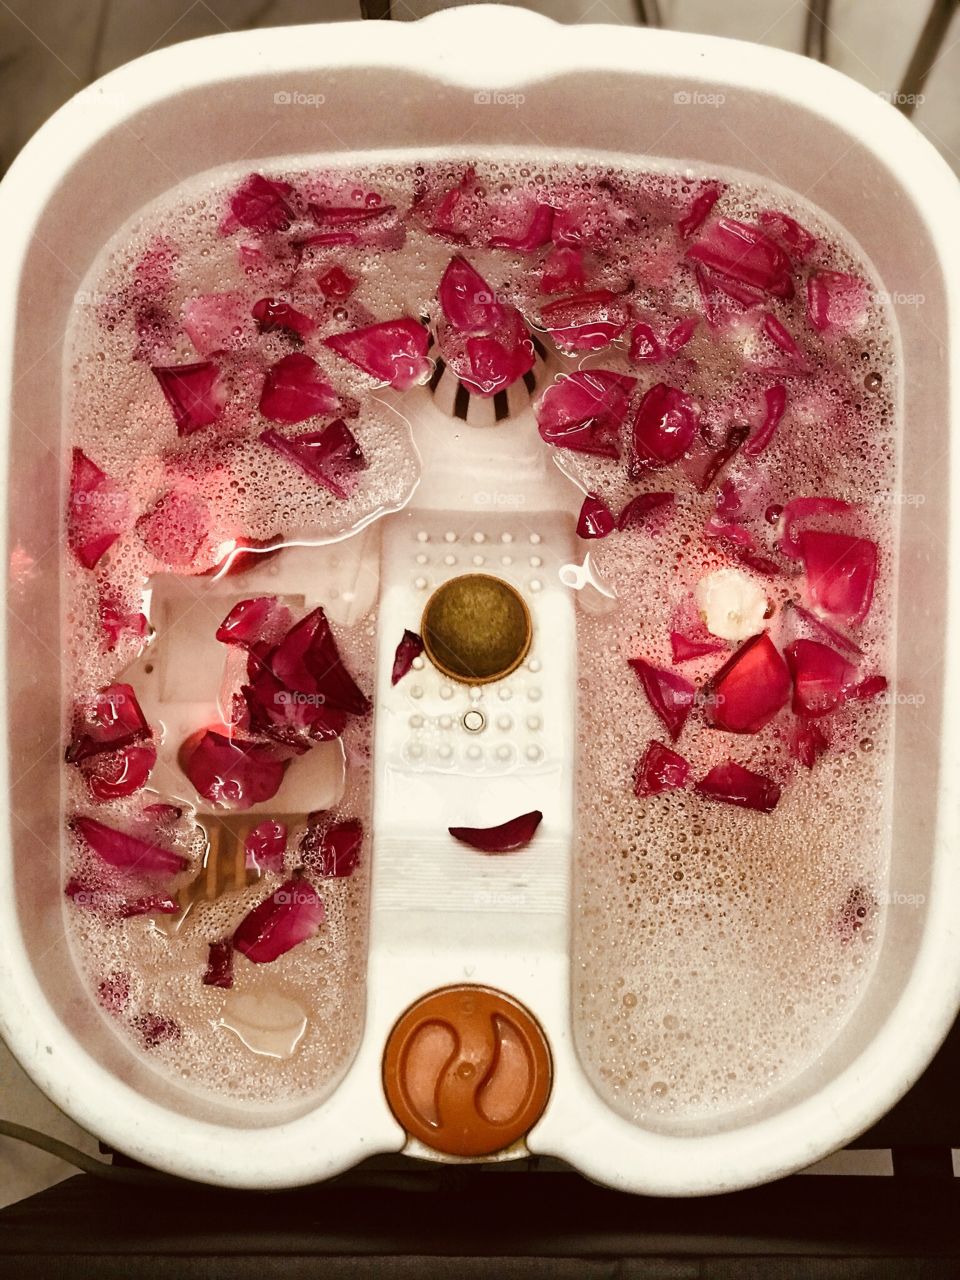 Pedicure foot spa machine with rose petals 